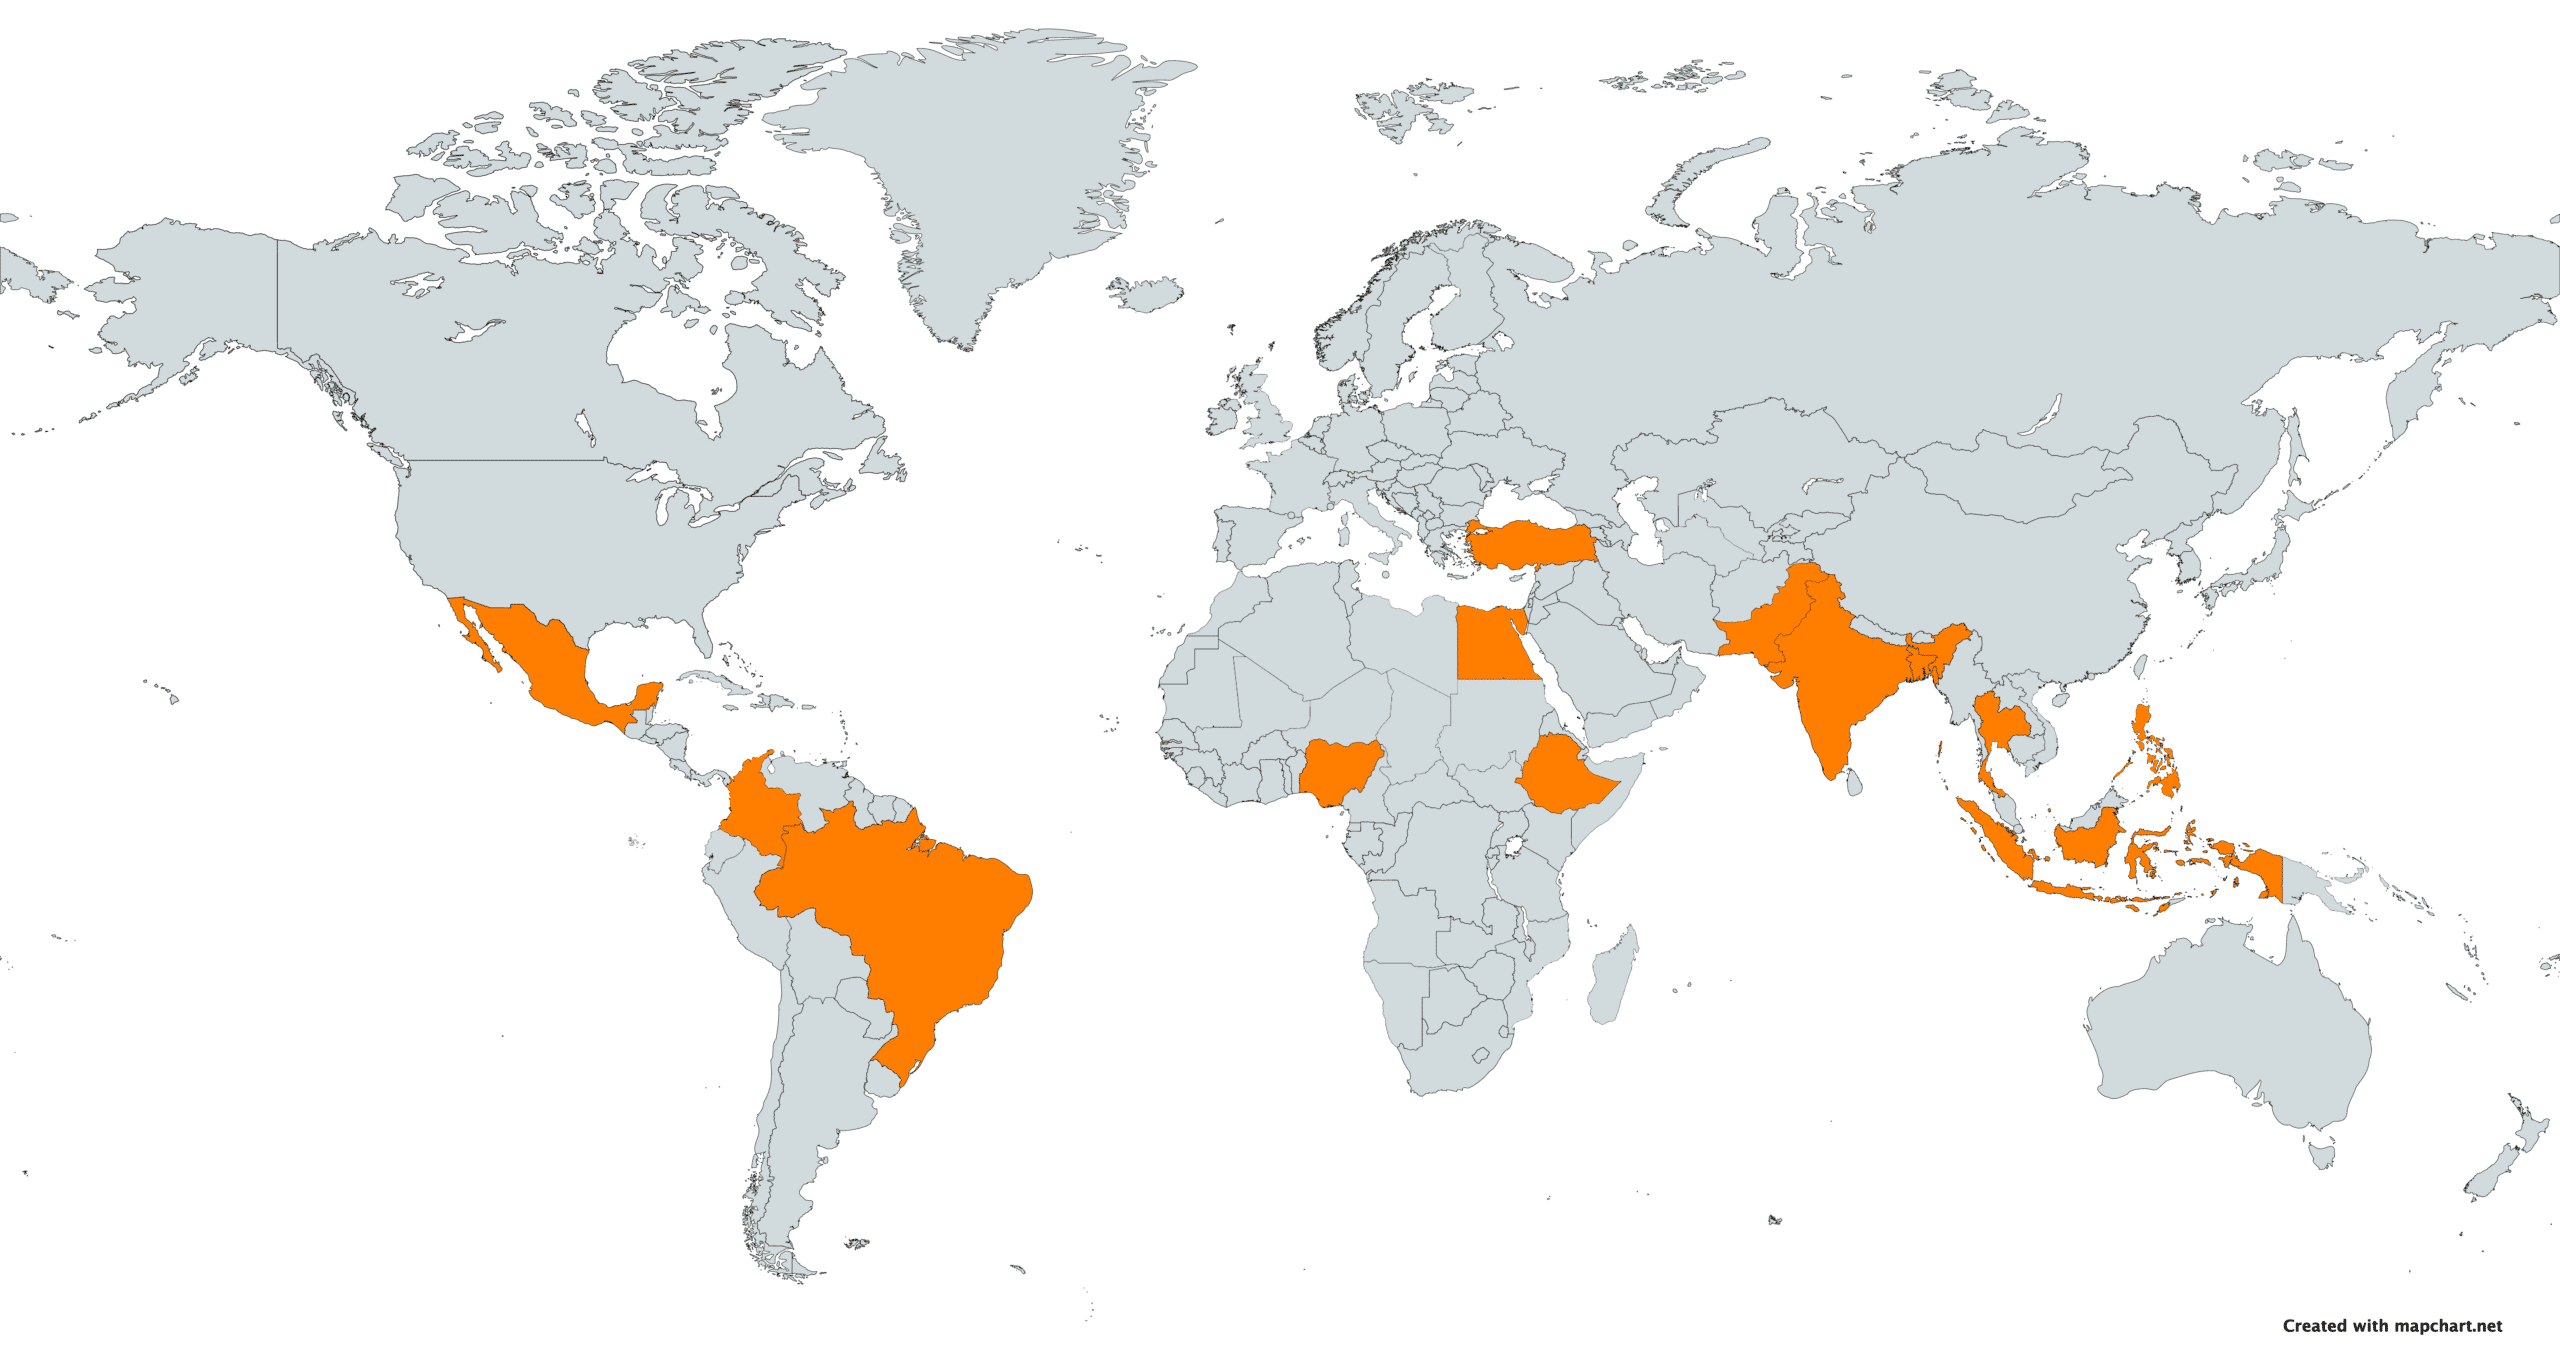 countries targeted by nssm-200, the kissinger report